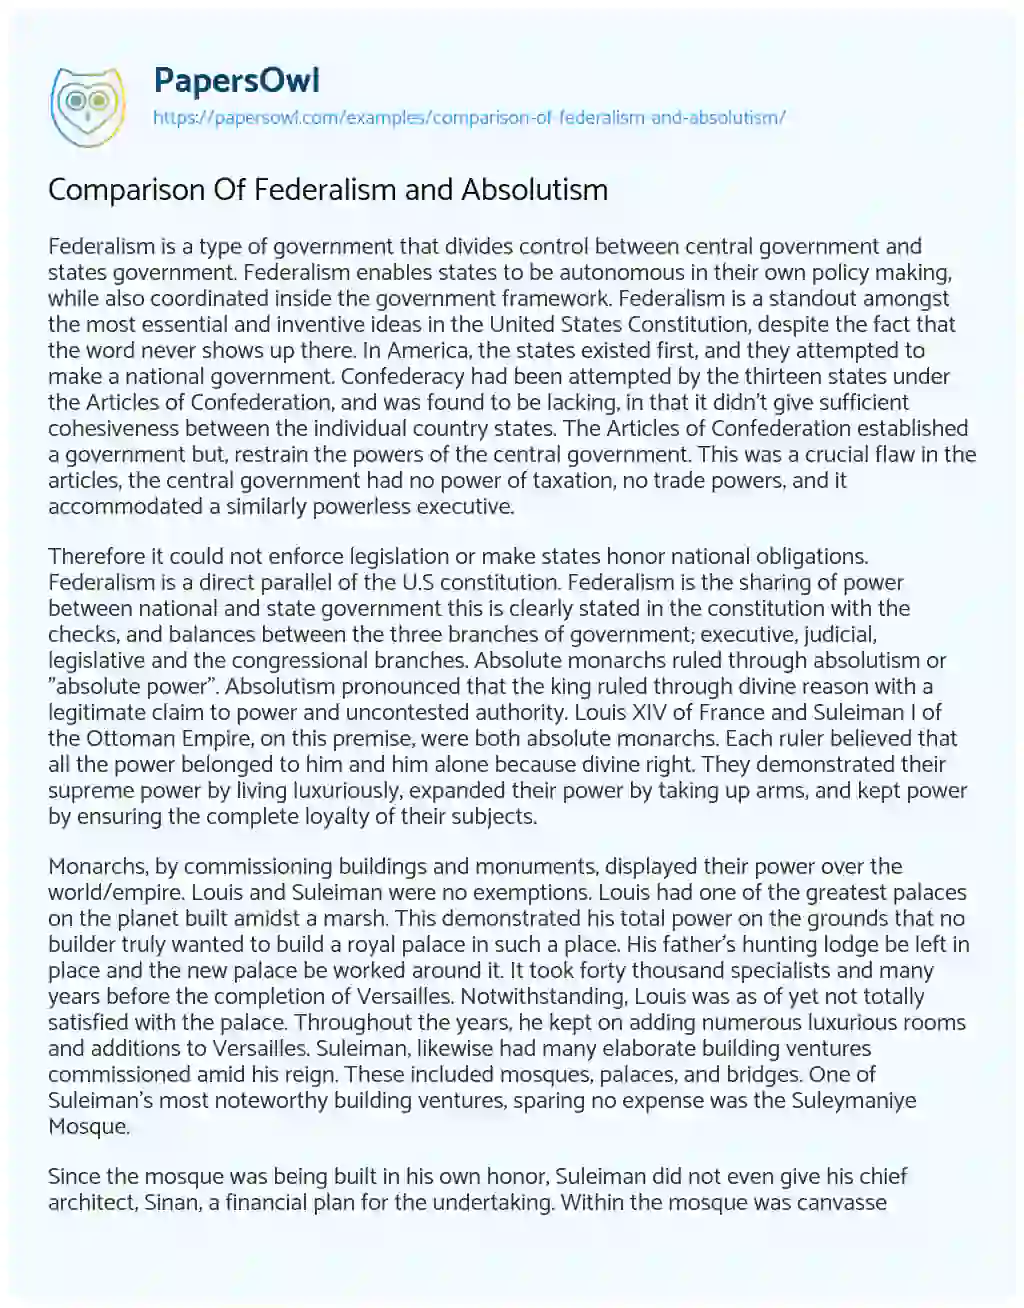 Essay on Comparison of Federalism and Absolutism